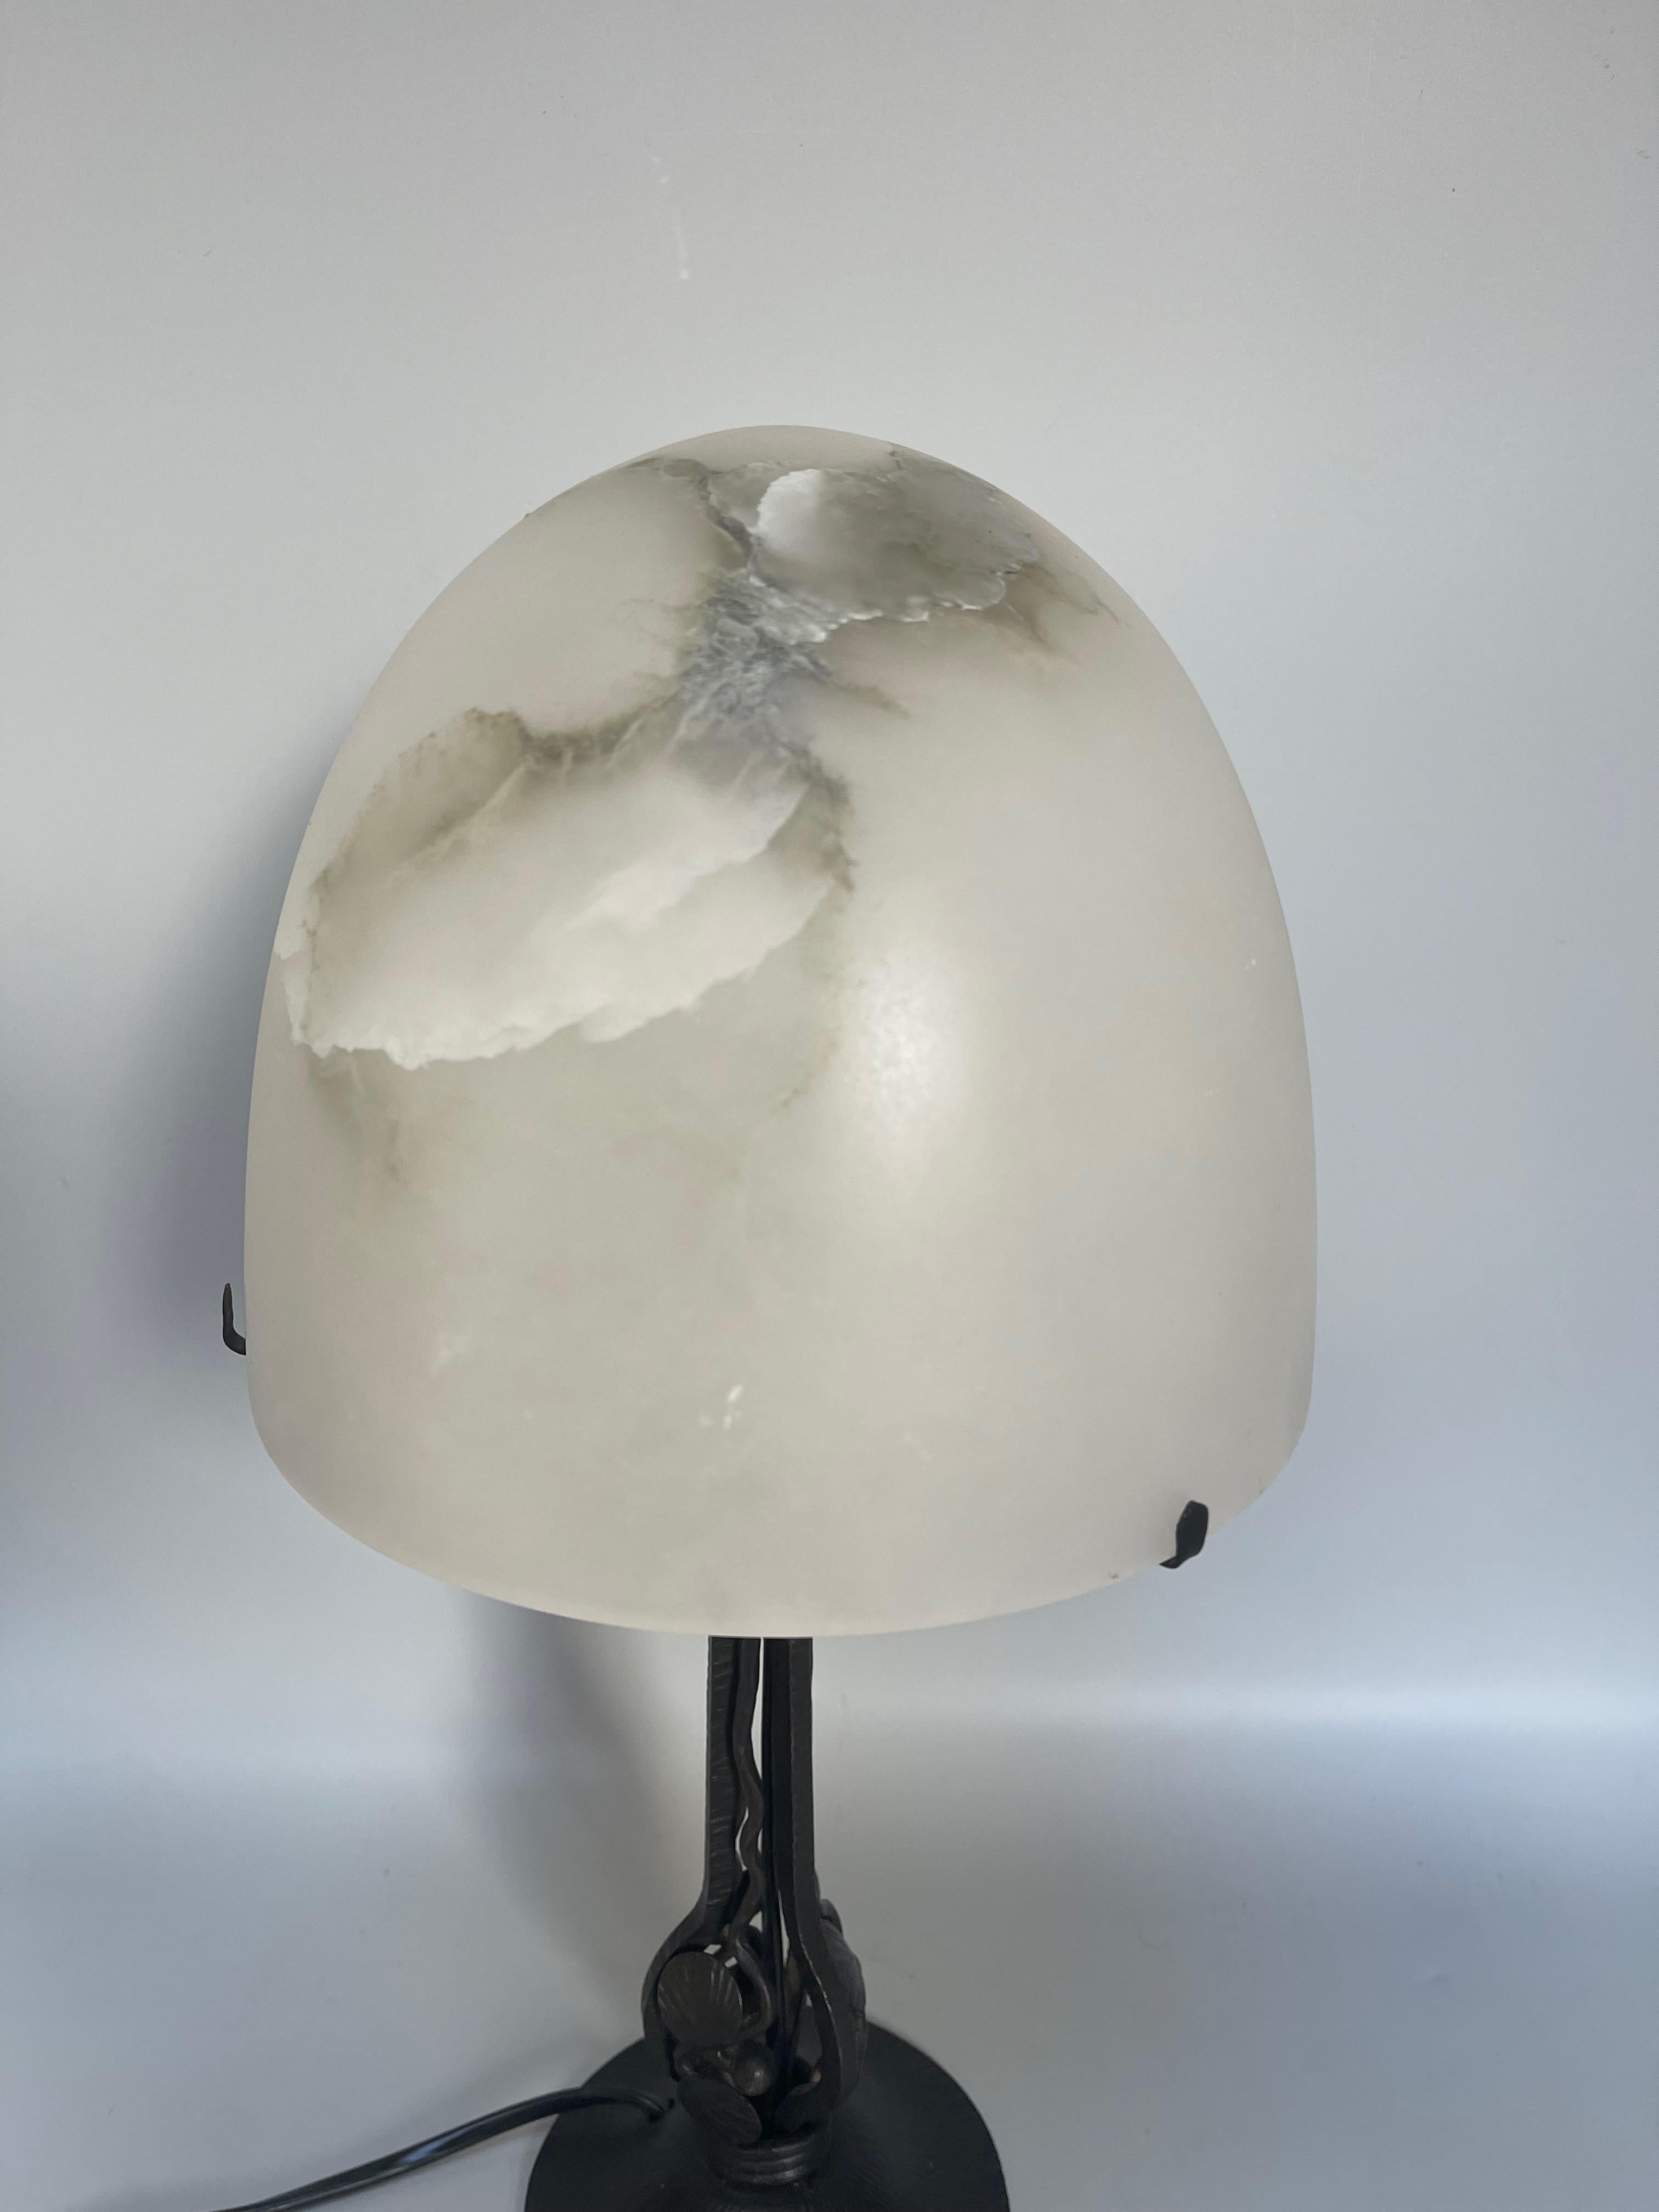 Art deco lamp circa 1930 the base is in wrought iron decorated with a pope shell in alabaster. 
Electrified and in perfect condition.

Diameter: shell 20 cm base 11.5 cm
Height: 40 cm
Weight: 2,7 KG